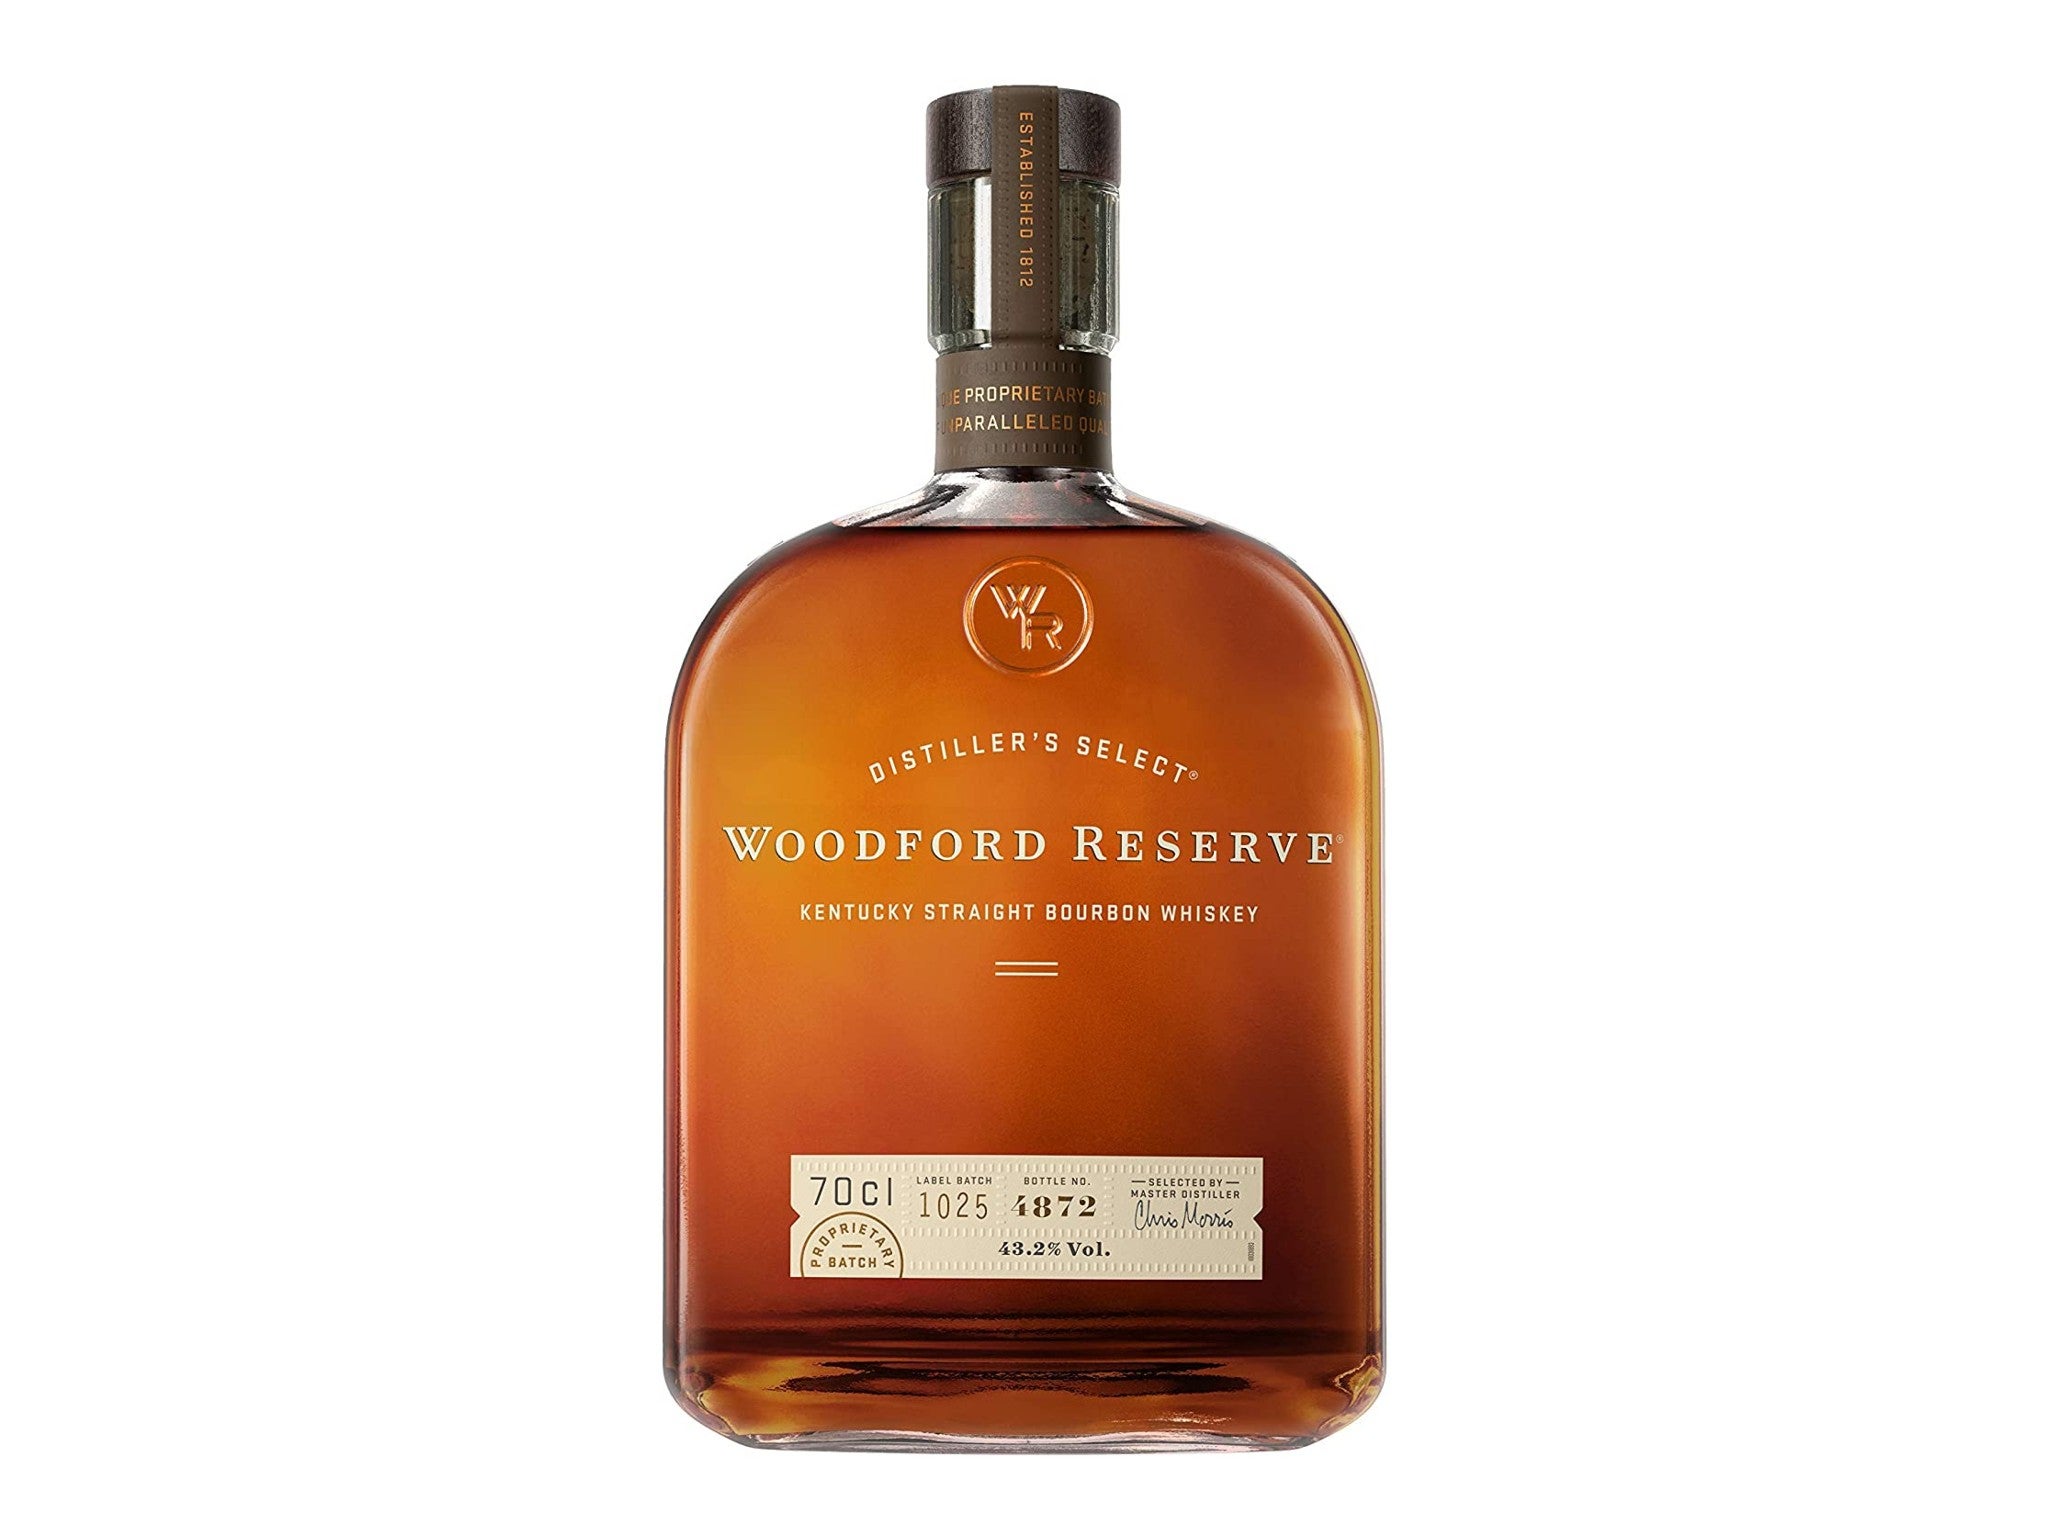 Woodford Reserve bourbon whiskey, 70cl indybest.jpeg